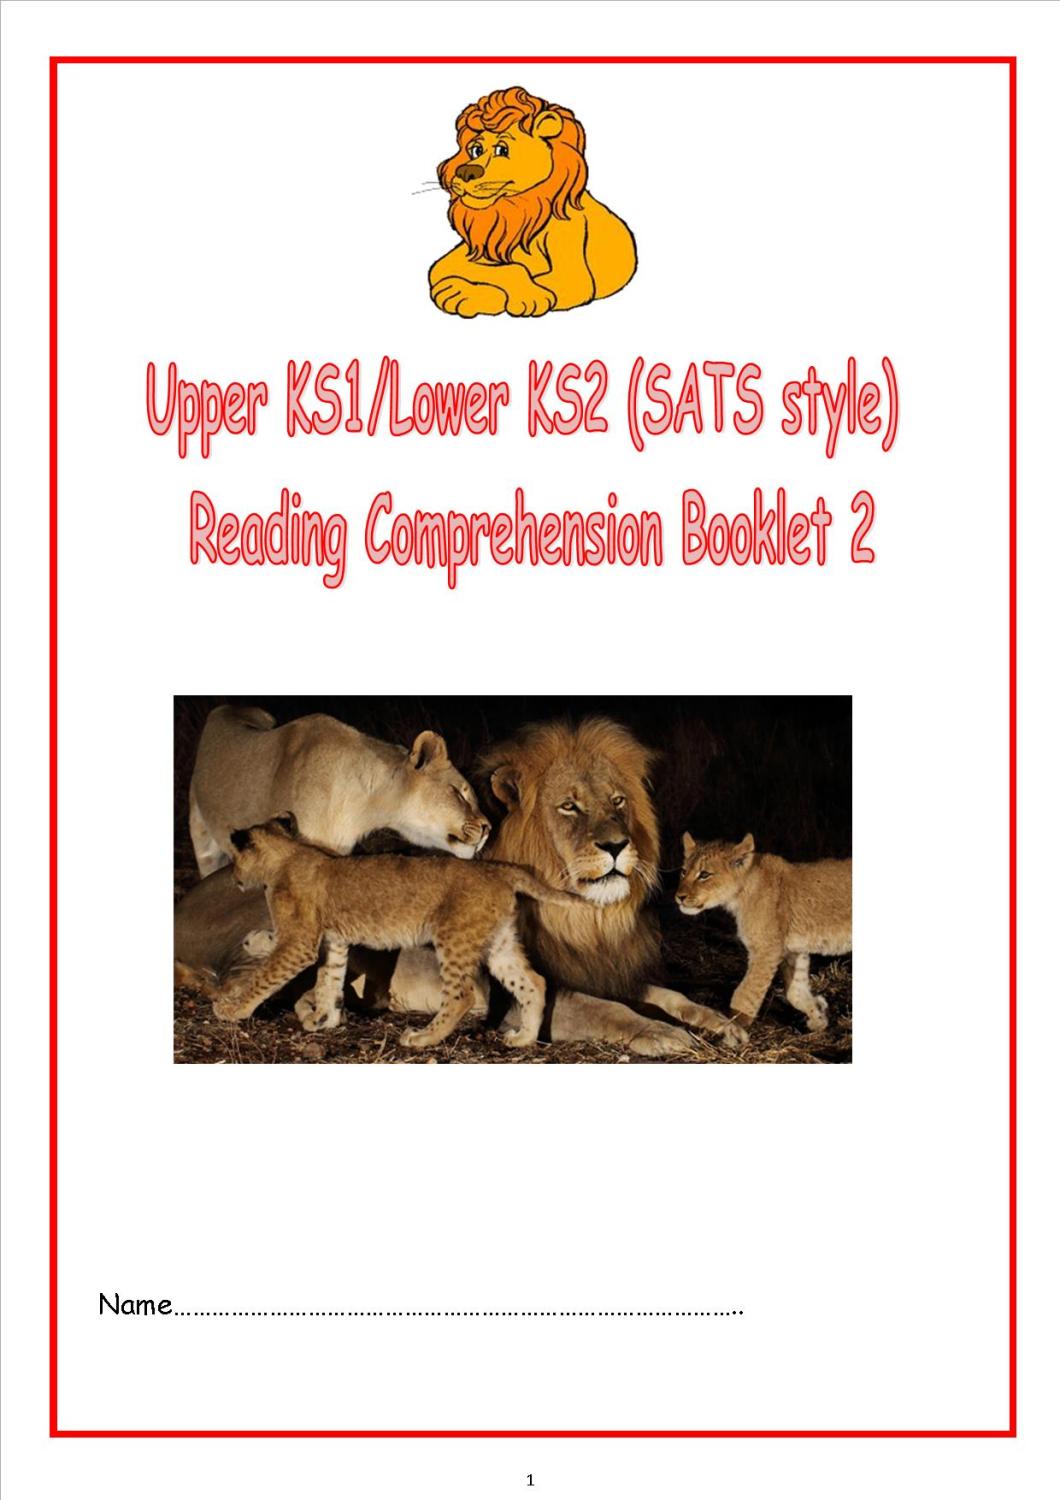 New KS1/LKS2 SATs style reading comprehension booklet.